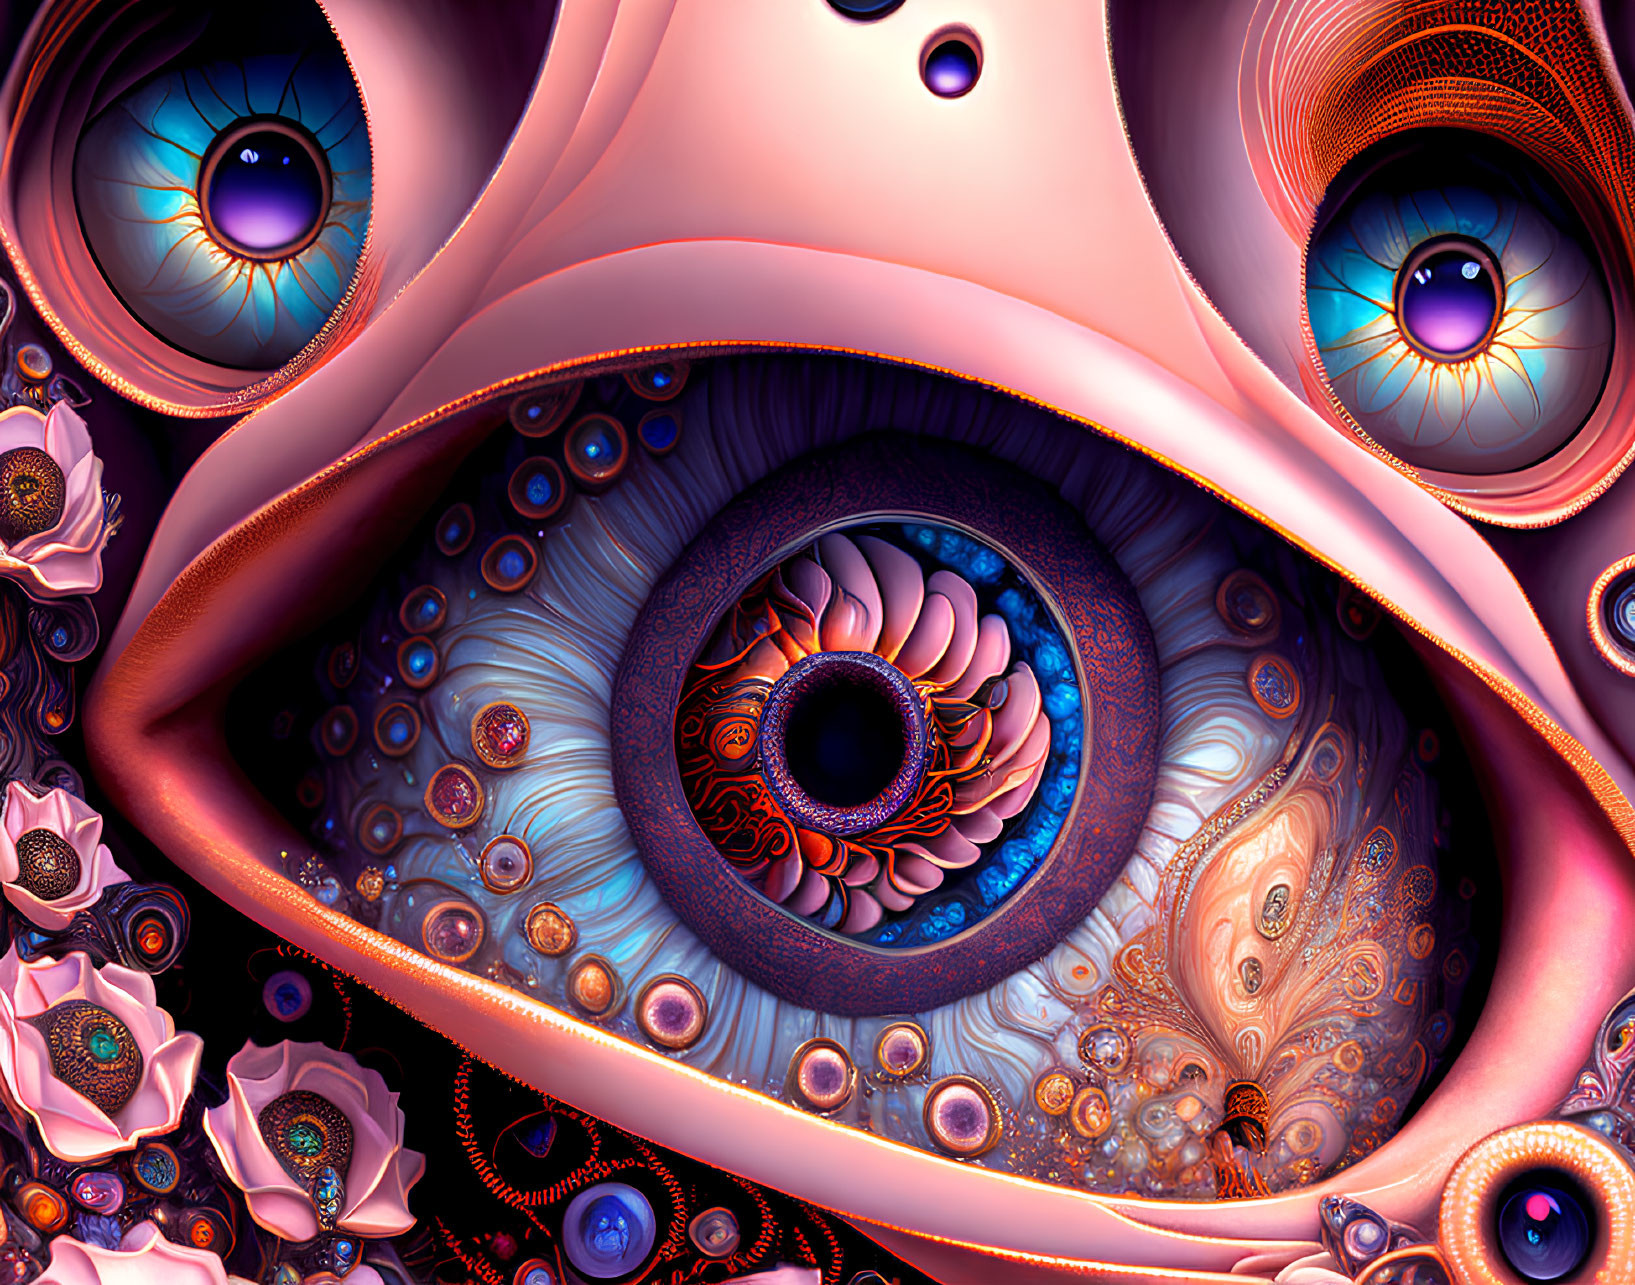 Colorful fractal art with eye-like patterns and intricate details in warm and cool hues.